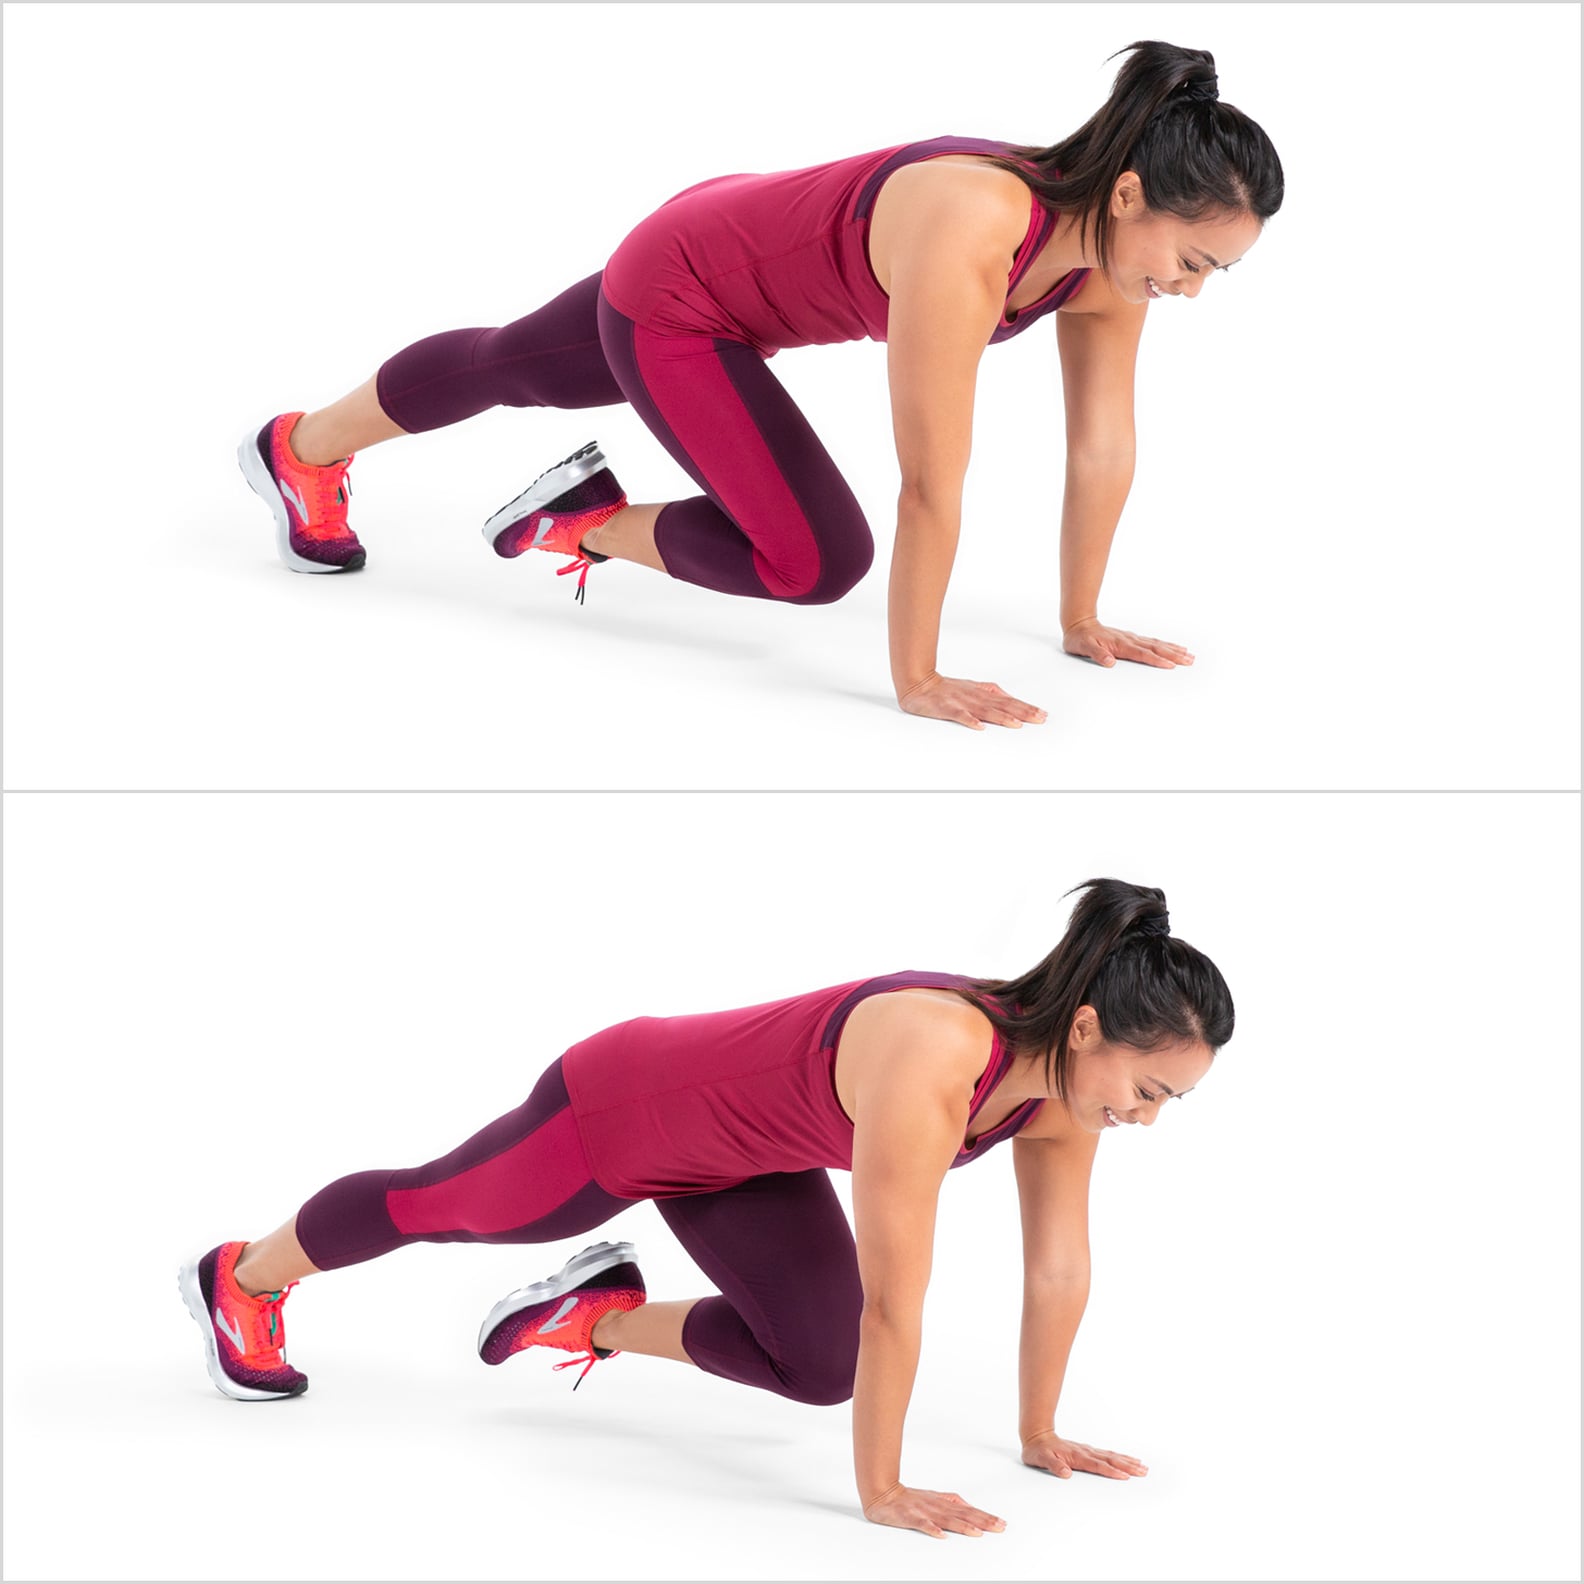 10-Minute Cardio For Abs | POPSUGAR Fitness